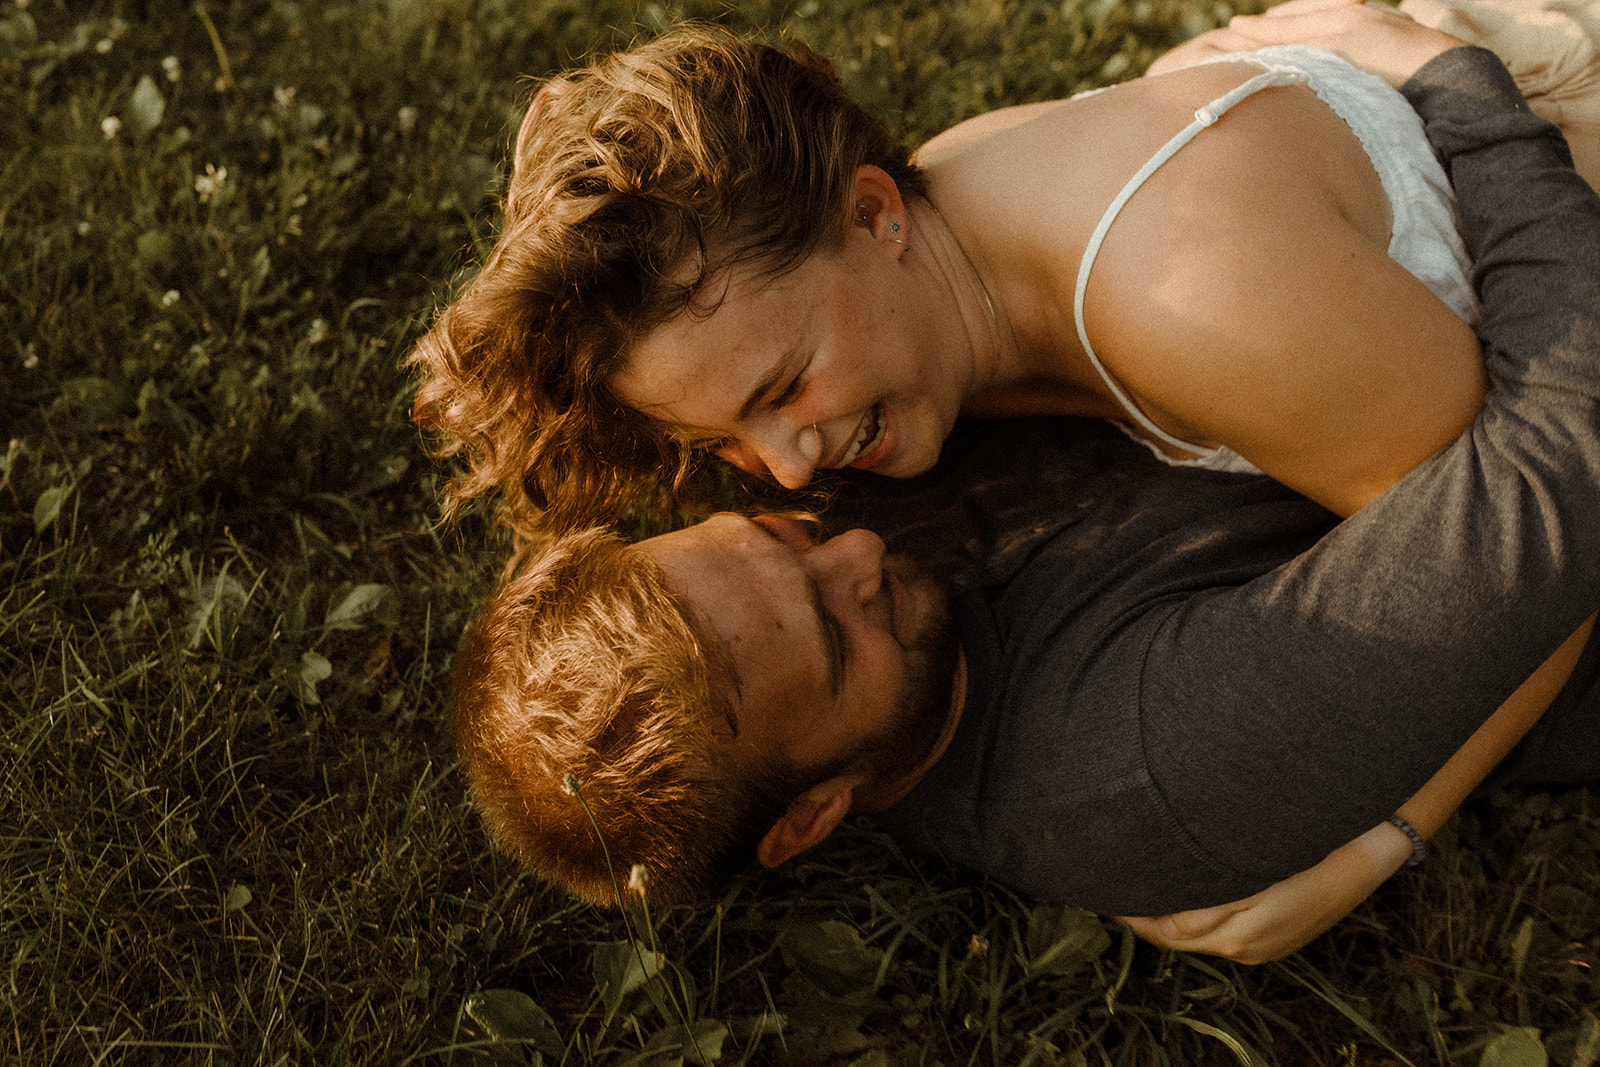 Romantic and intimate couples photoshoot in a field.